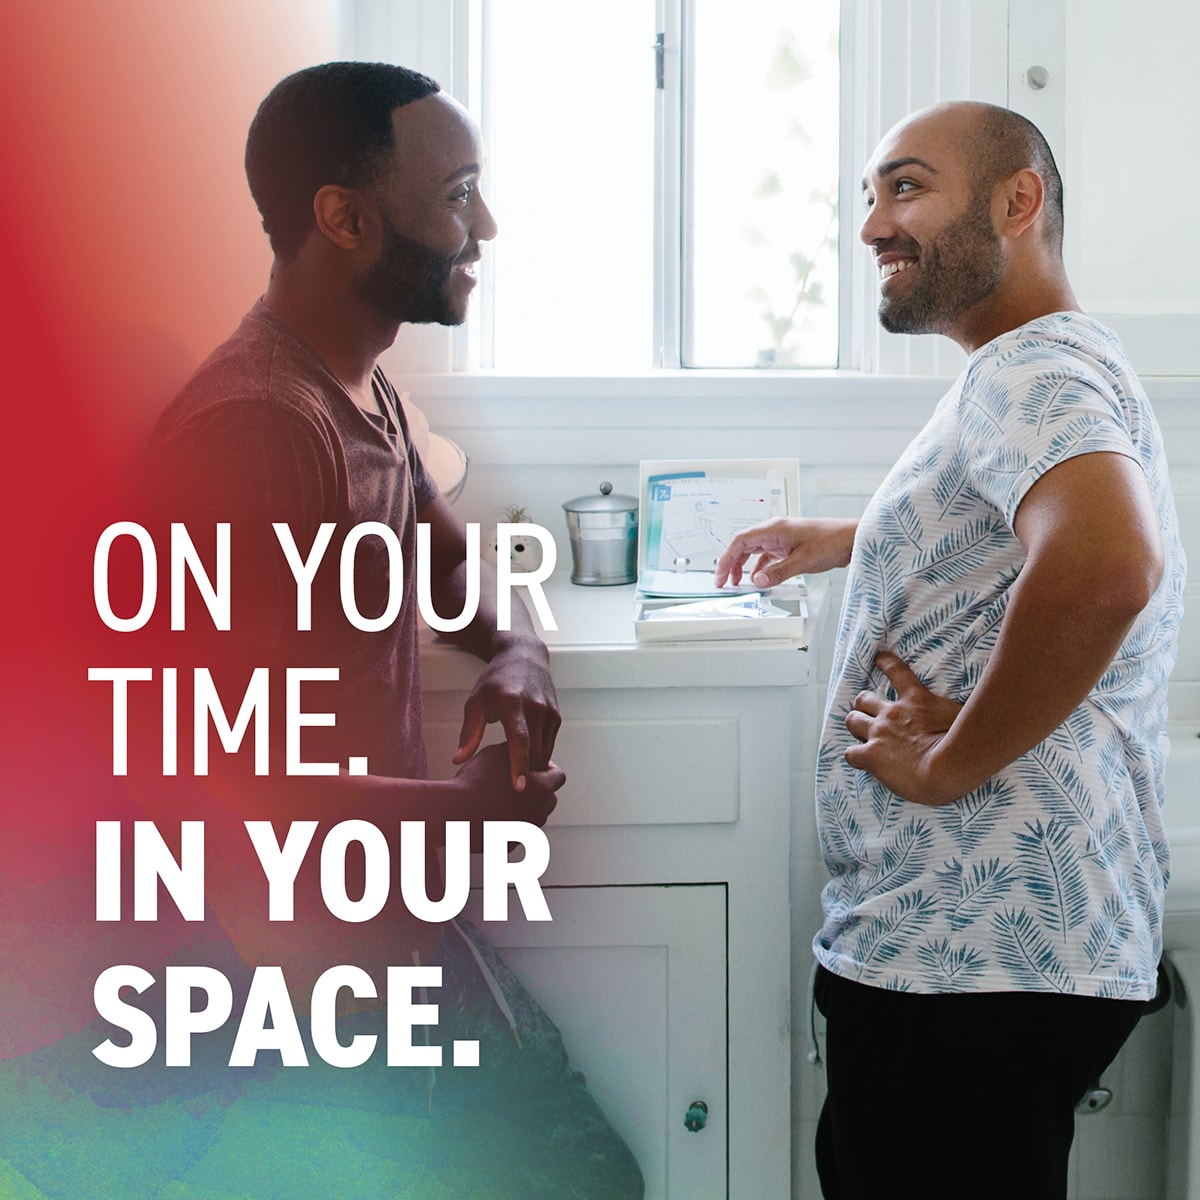 On your time. In your space.